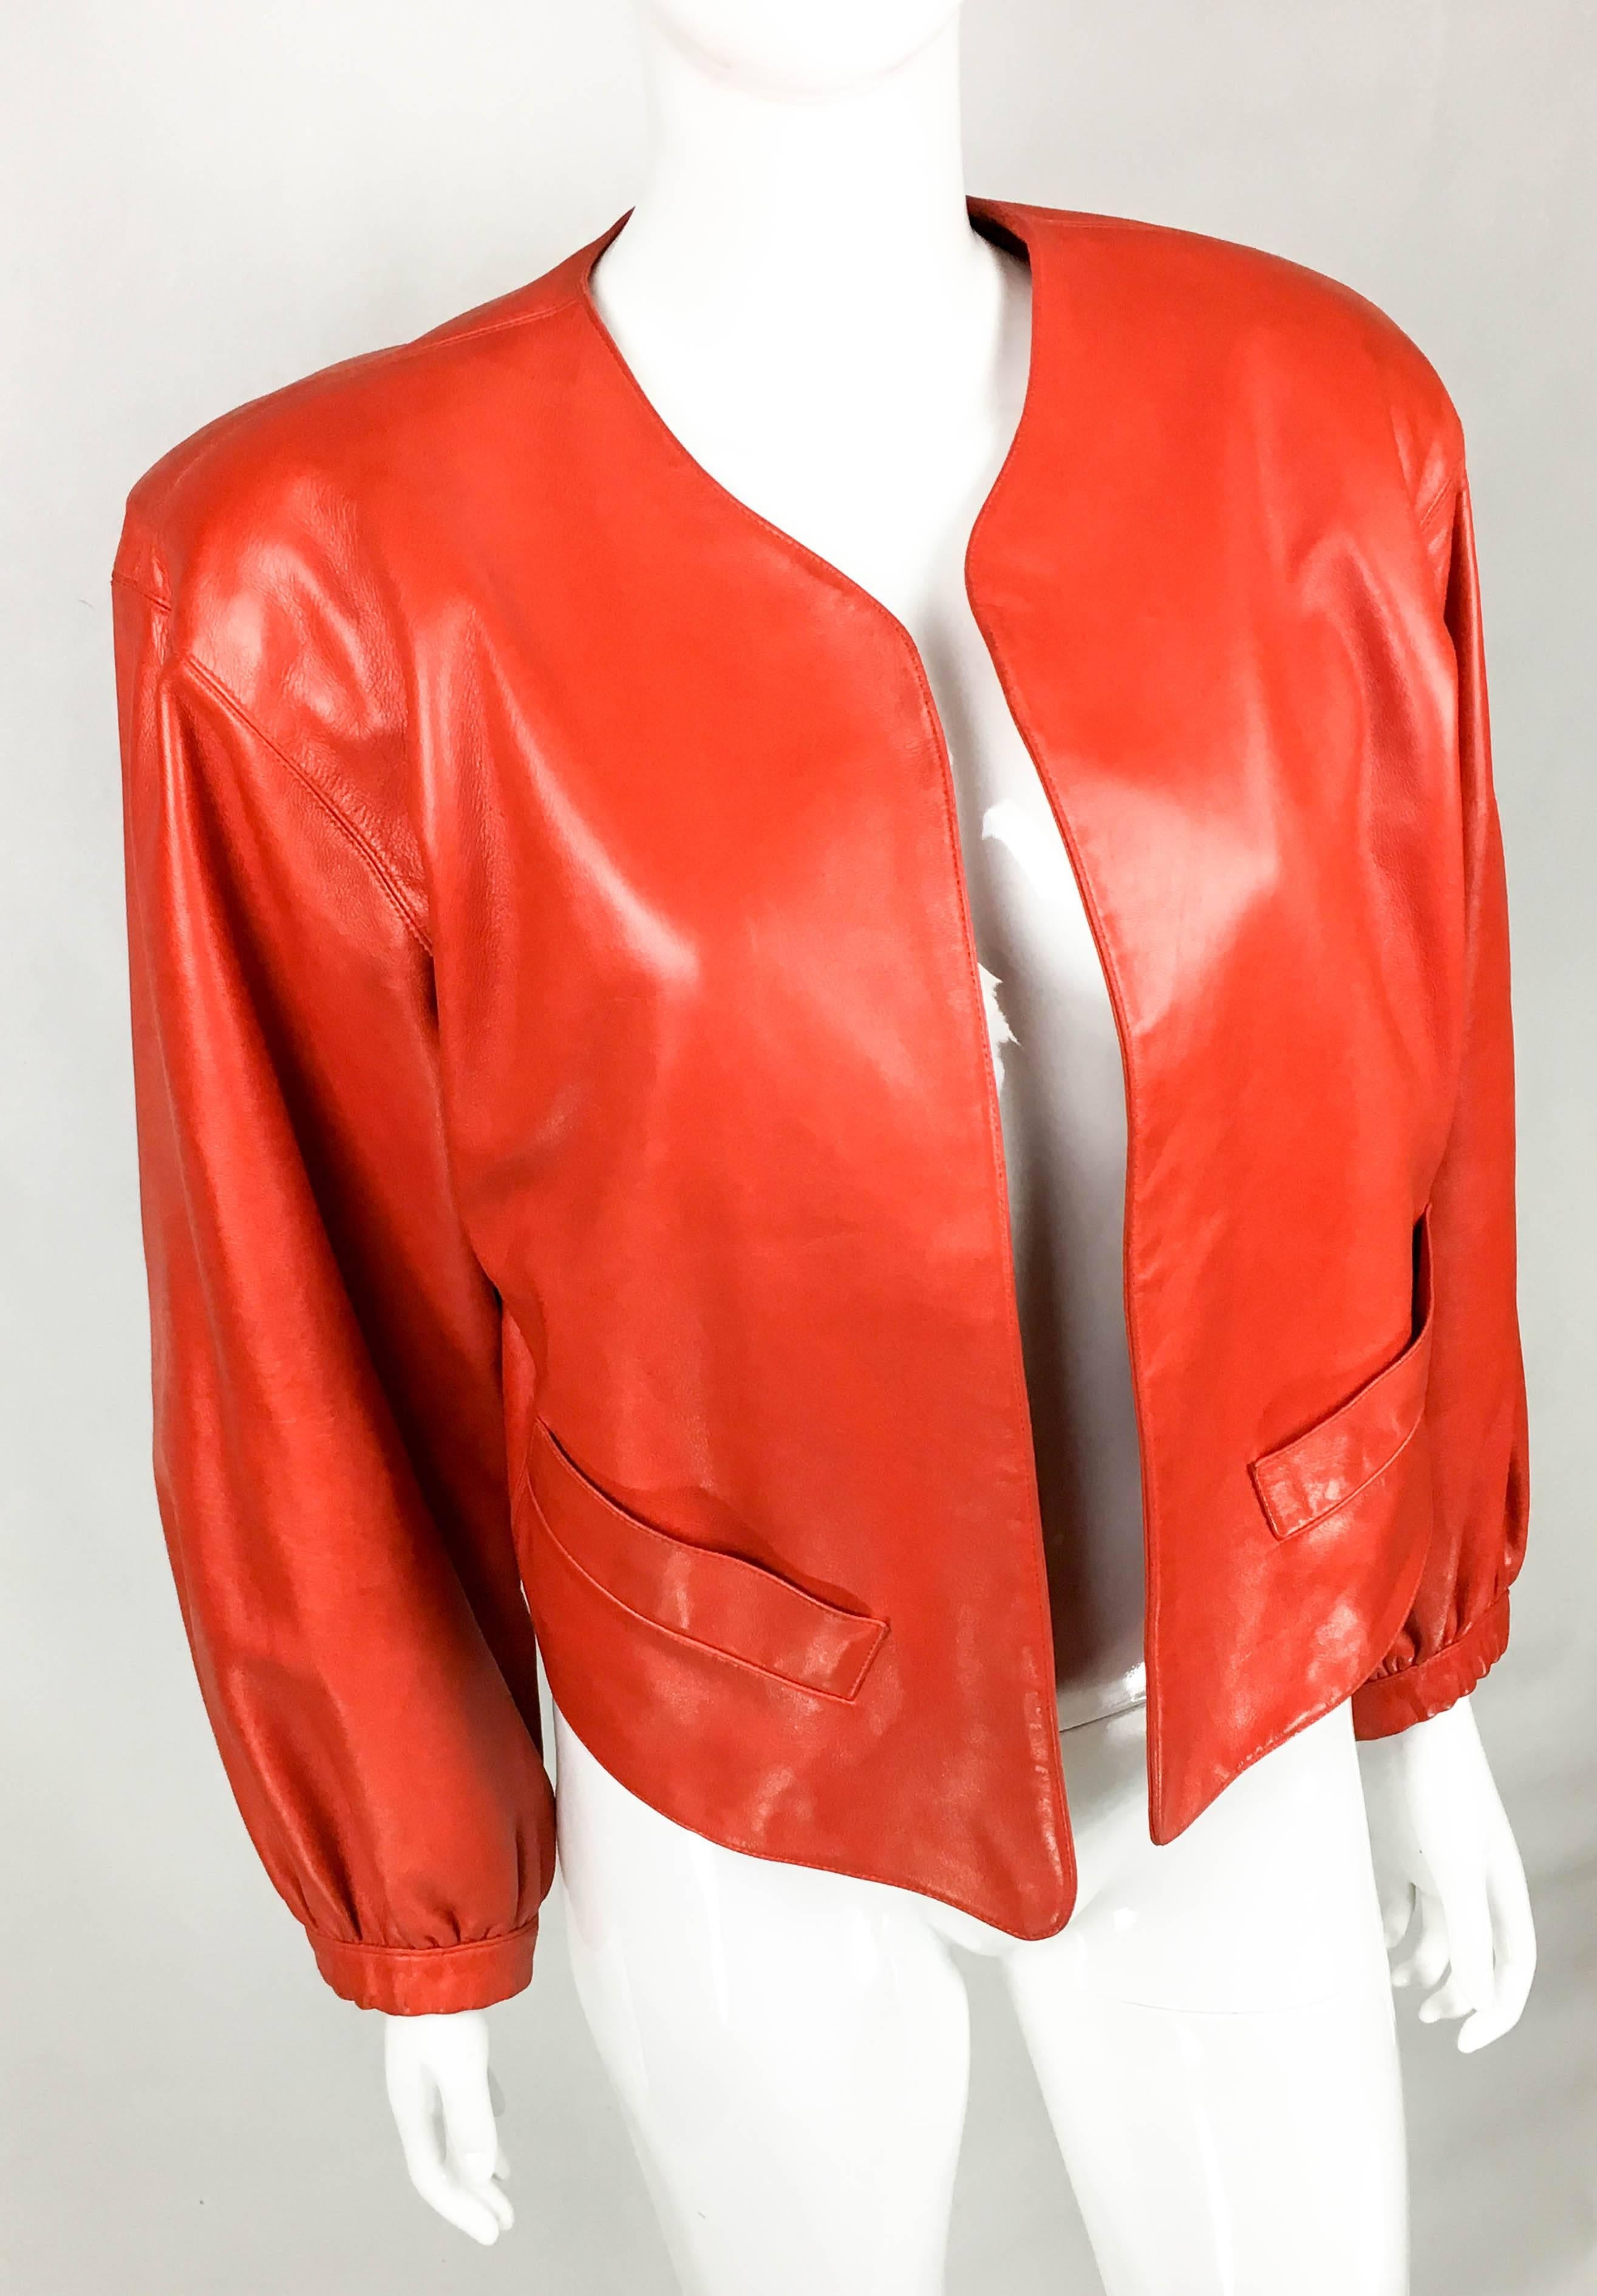 ysl red leather jacket